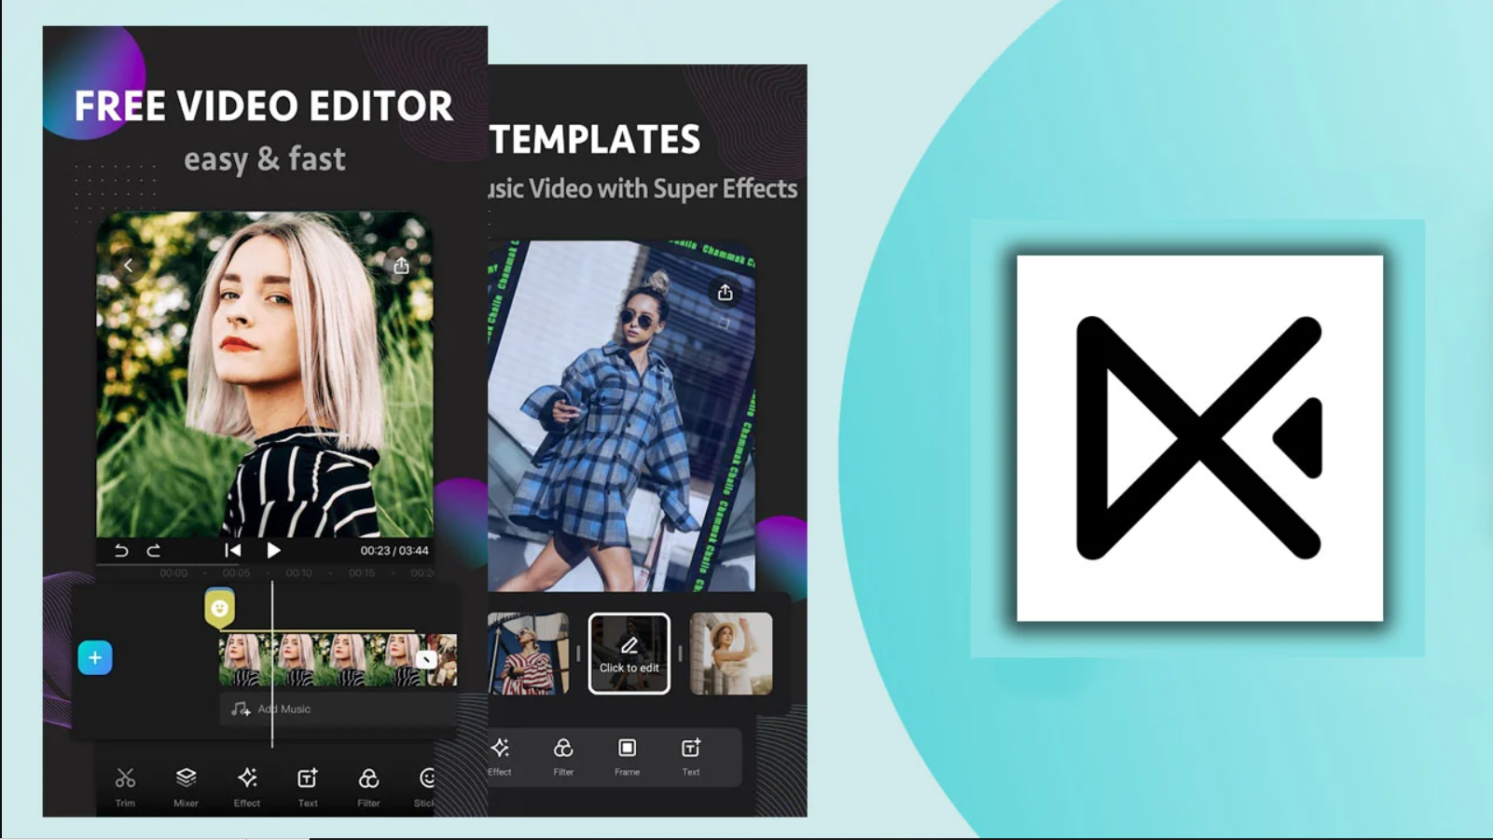 EasyCut Pro 5.111 / Studio 5.027 instal the last version for android